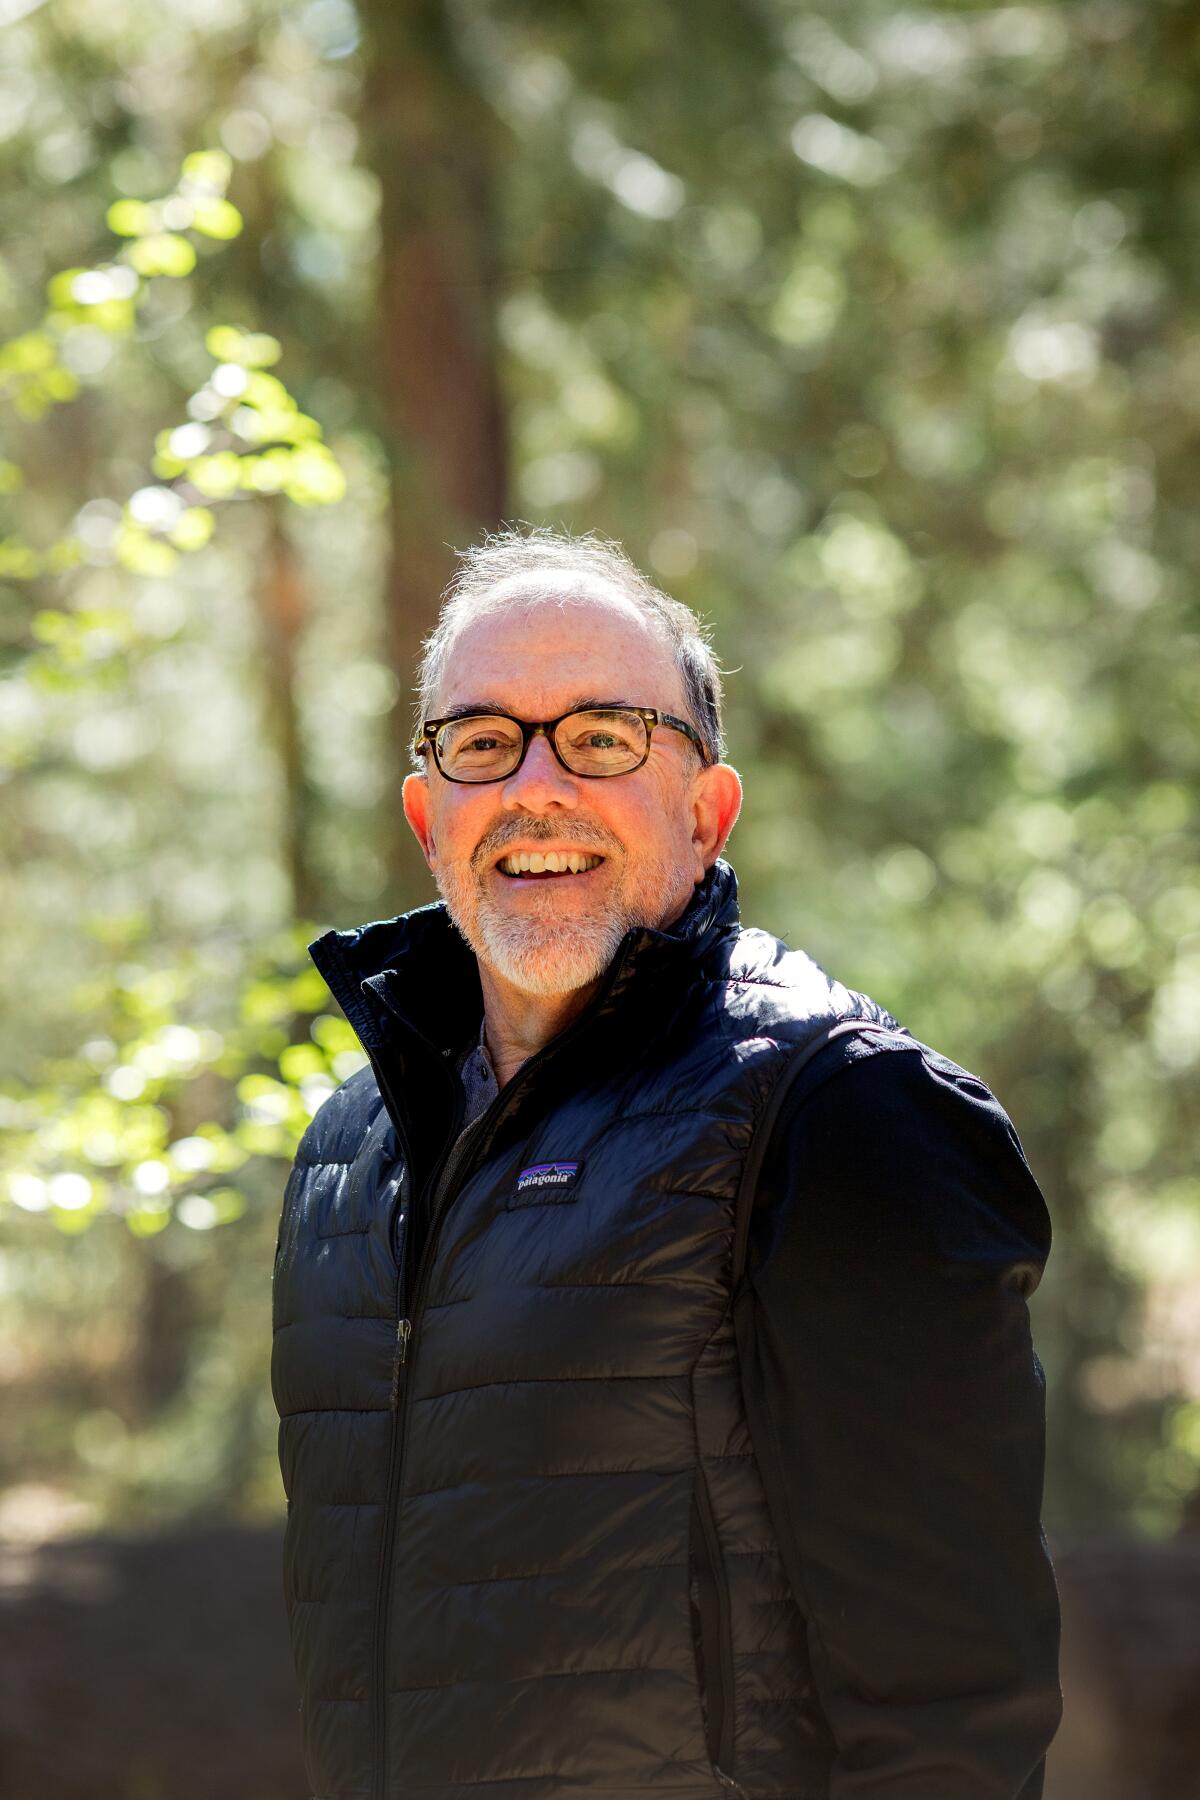 Author John Farrell in a quilted jacket outdoors